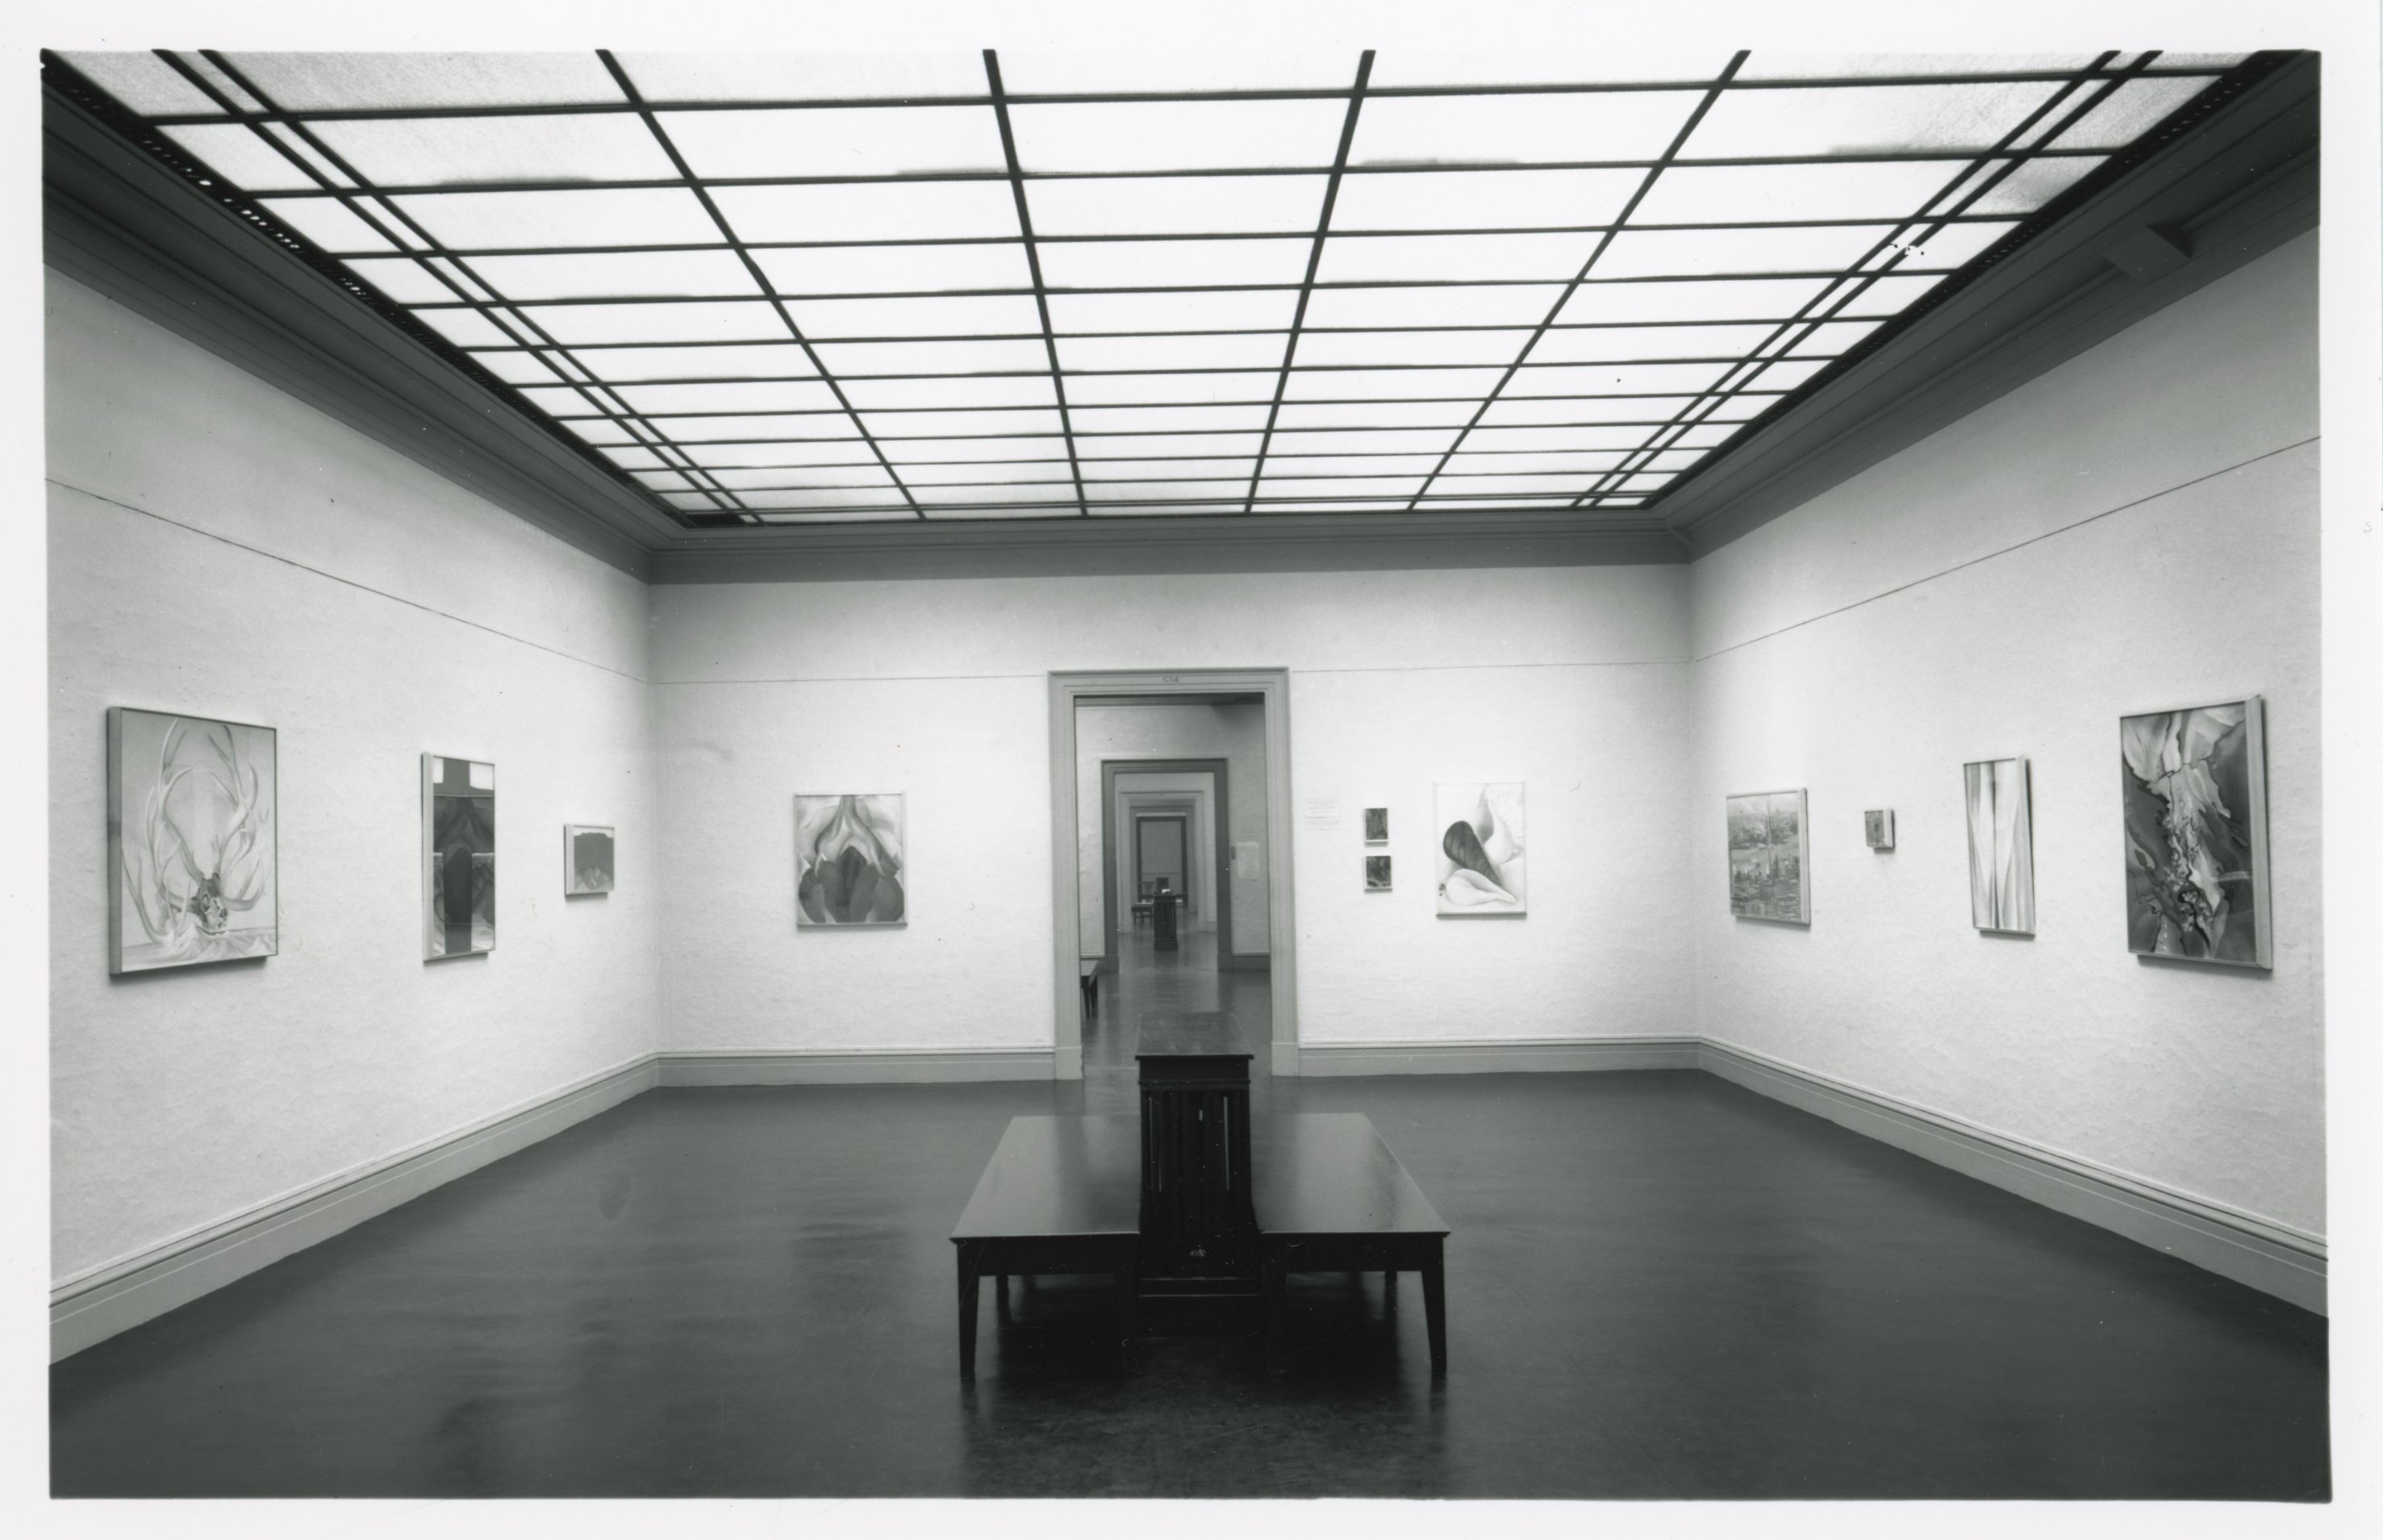 Black and white photograph. Eleven widely spaced paintings line the walls of a long room in this installation view. Through a squared opening at the end of the room opposite us, at least three more doorways telescope into the distance, ending in a flat wall at the far end of the building. The room we are in has a double-sided wooden bench at the center beneath a grid of lights above, which reflects off the shiny dark floor. The paintings show flaring petals or antlers, or layers of geometric shapes.